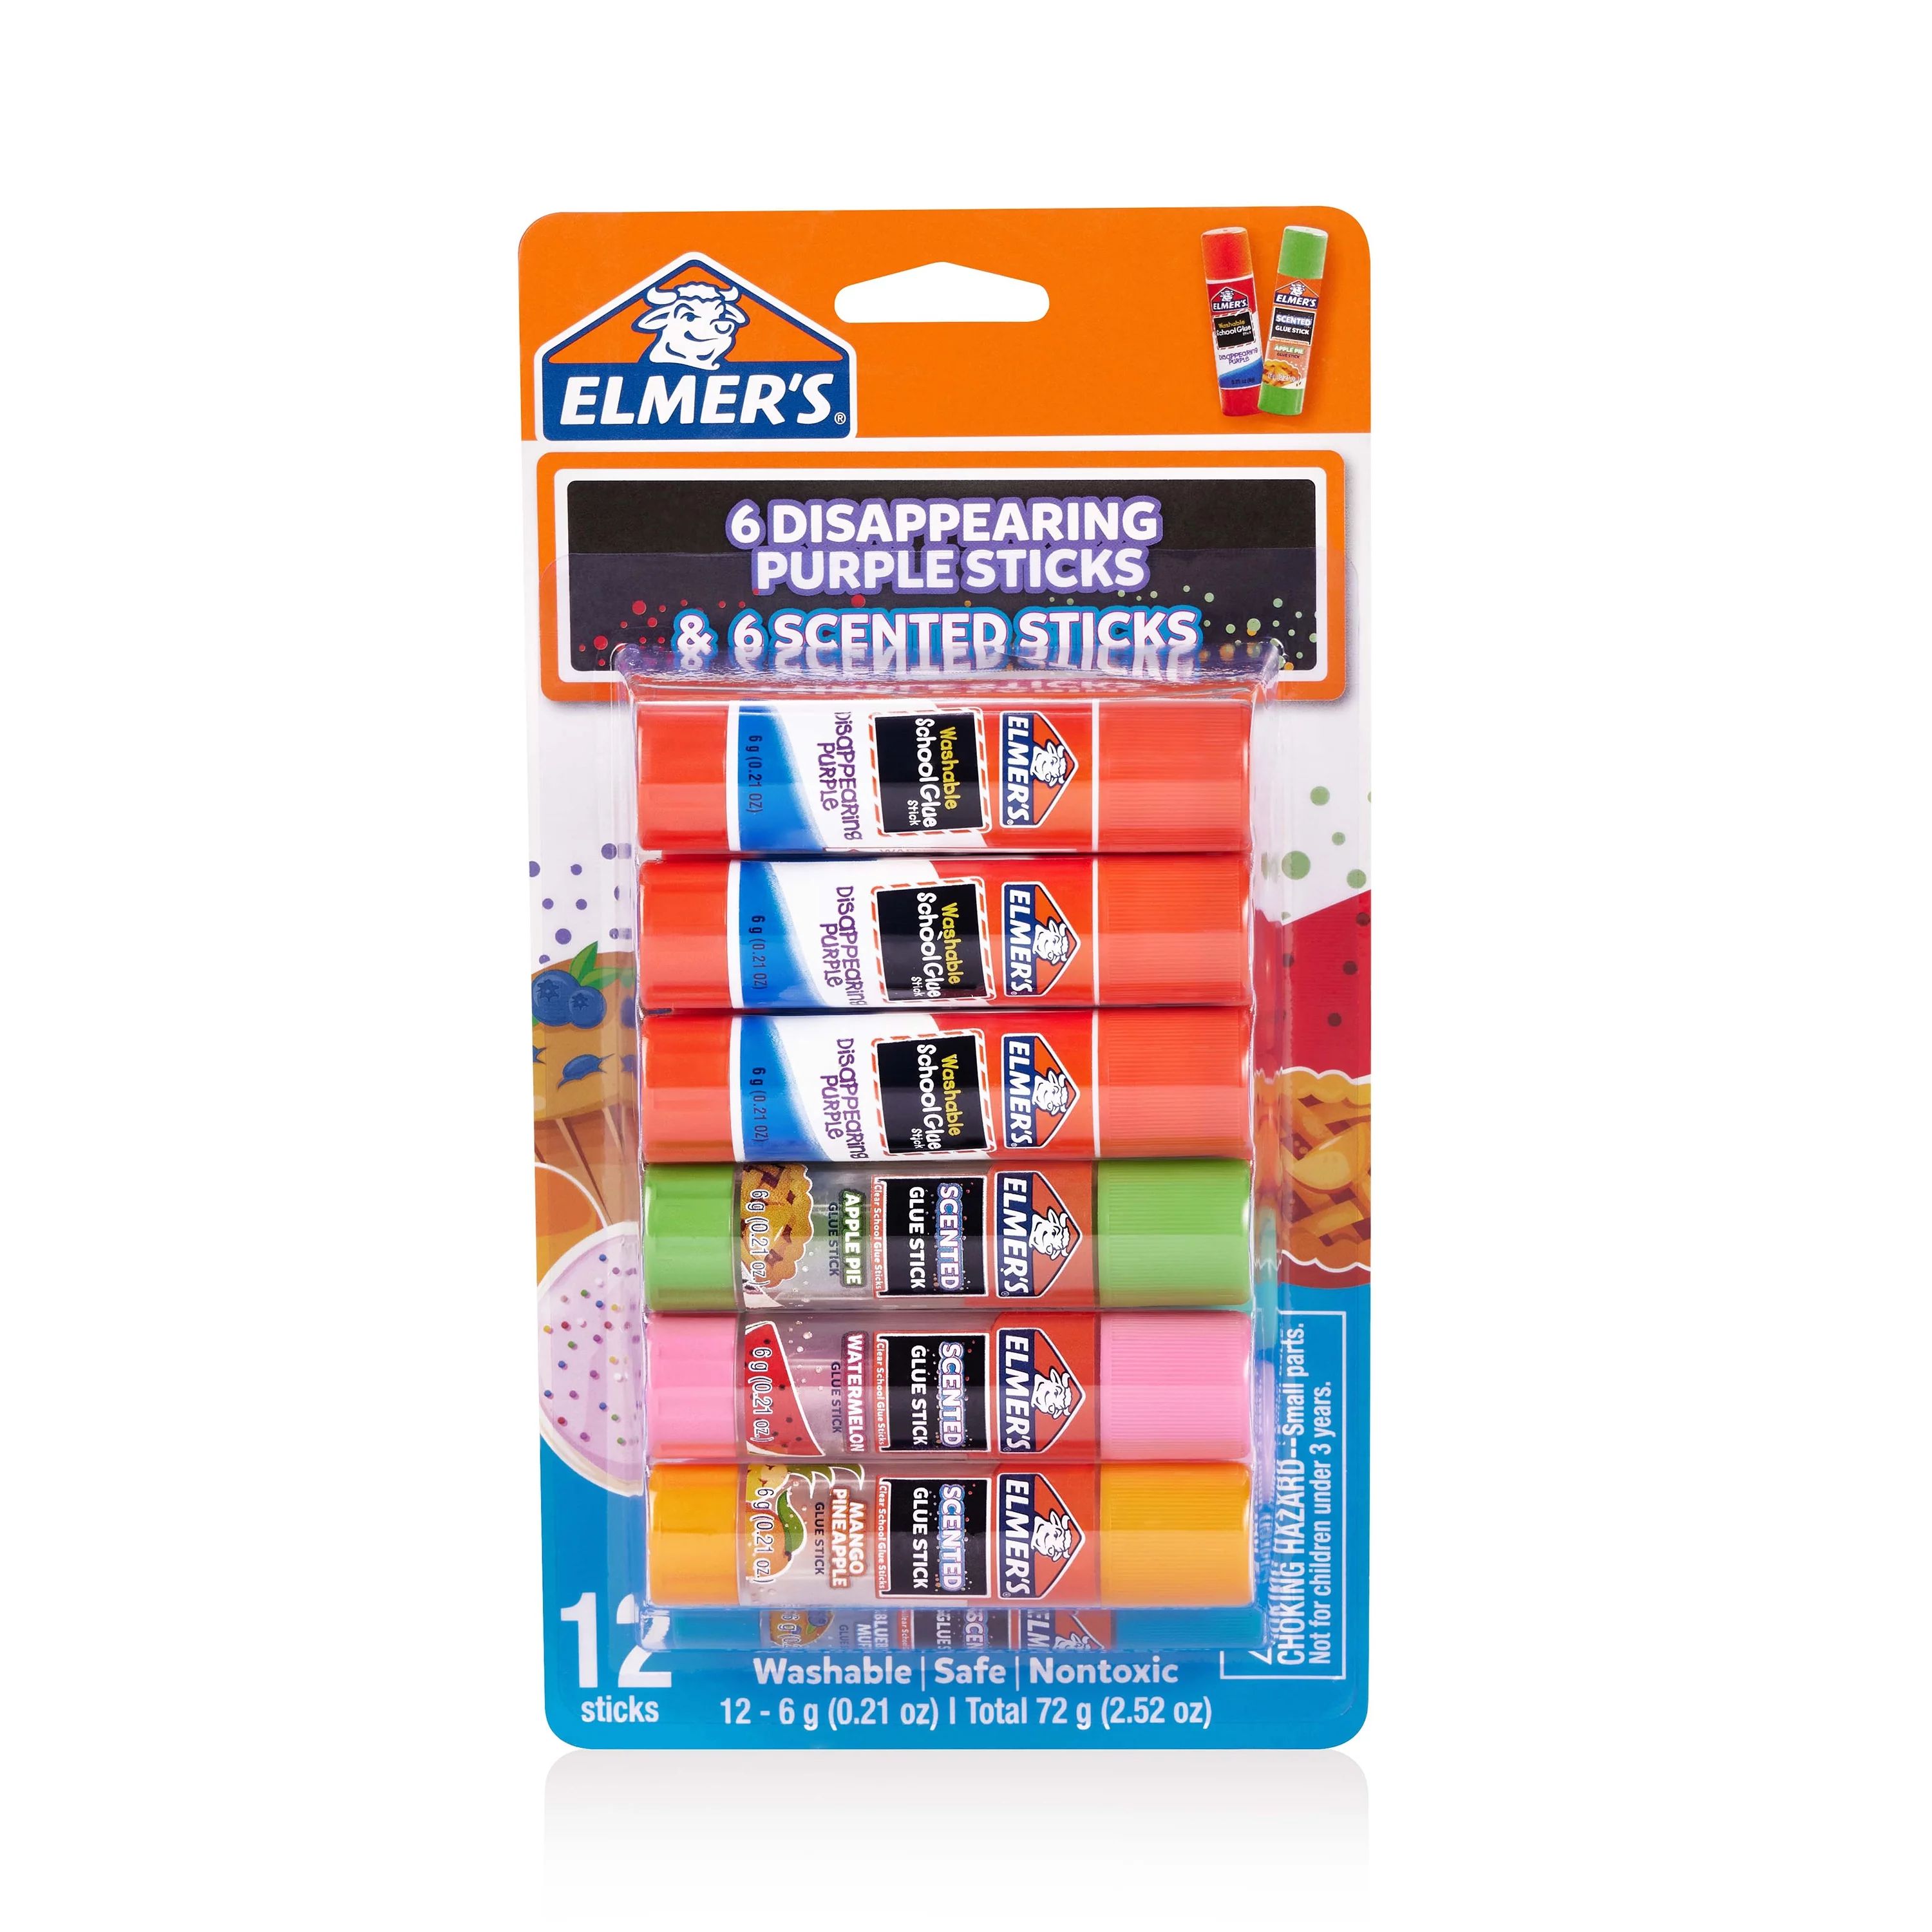 Elmer’s Scented Glue Sticks Variety Pack, Includes Disappearing Purple Glue Sticks, 12 Count | Walmart (US)